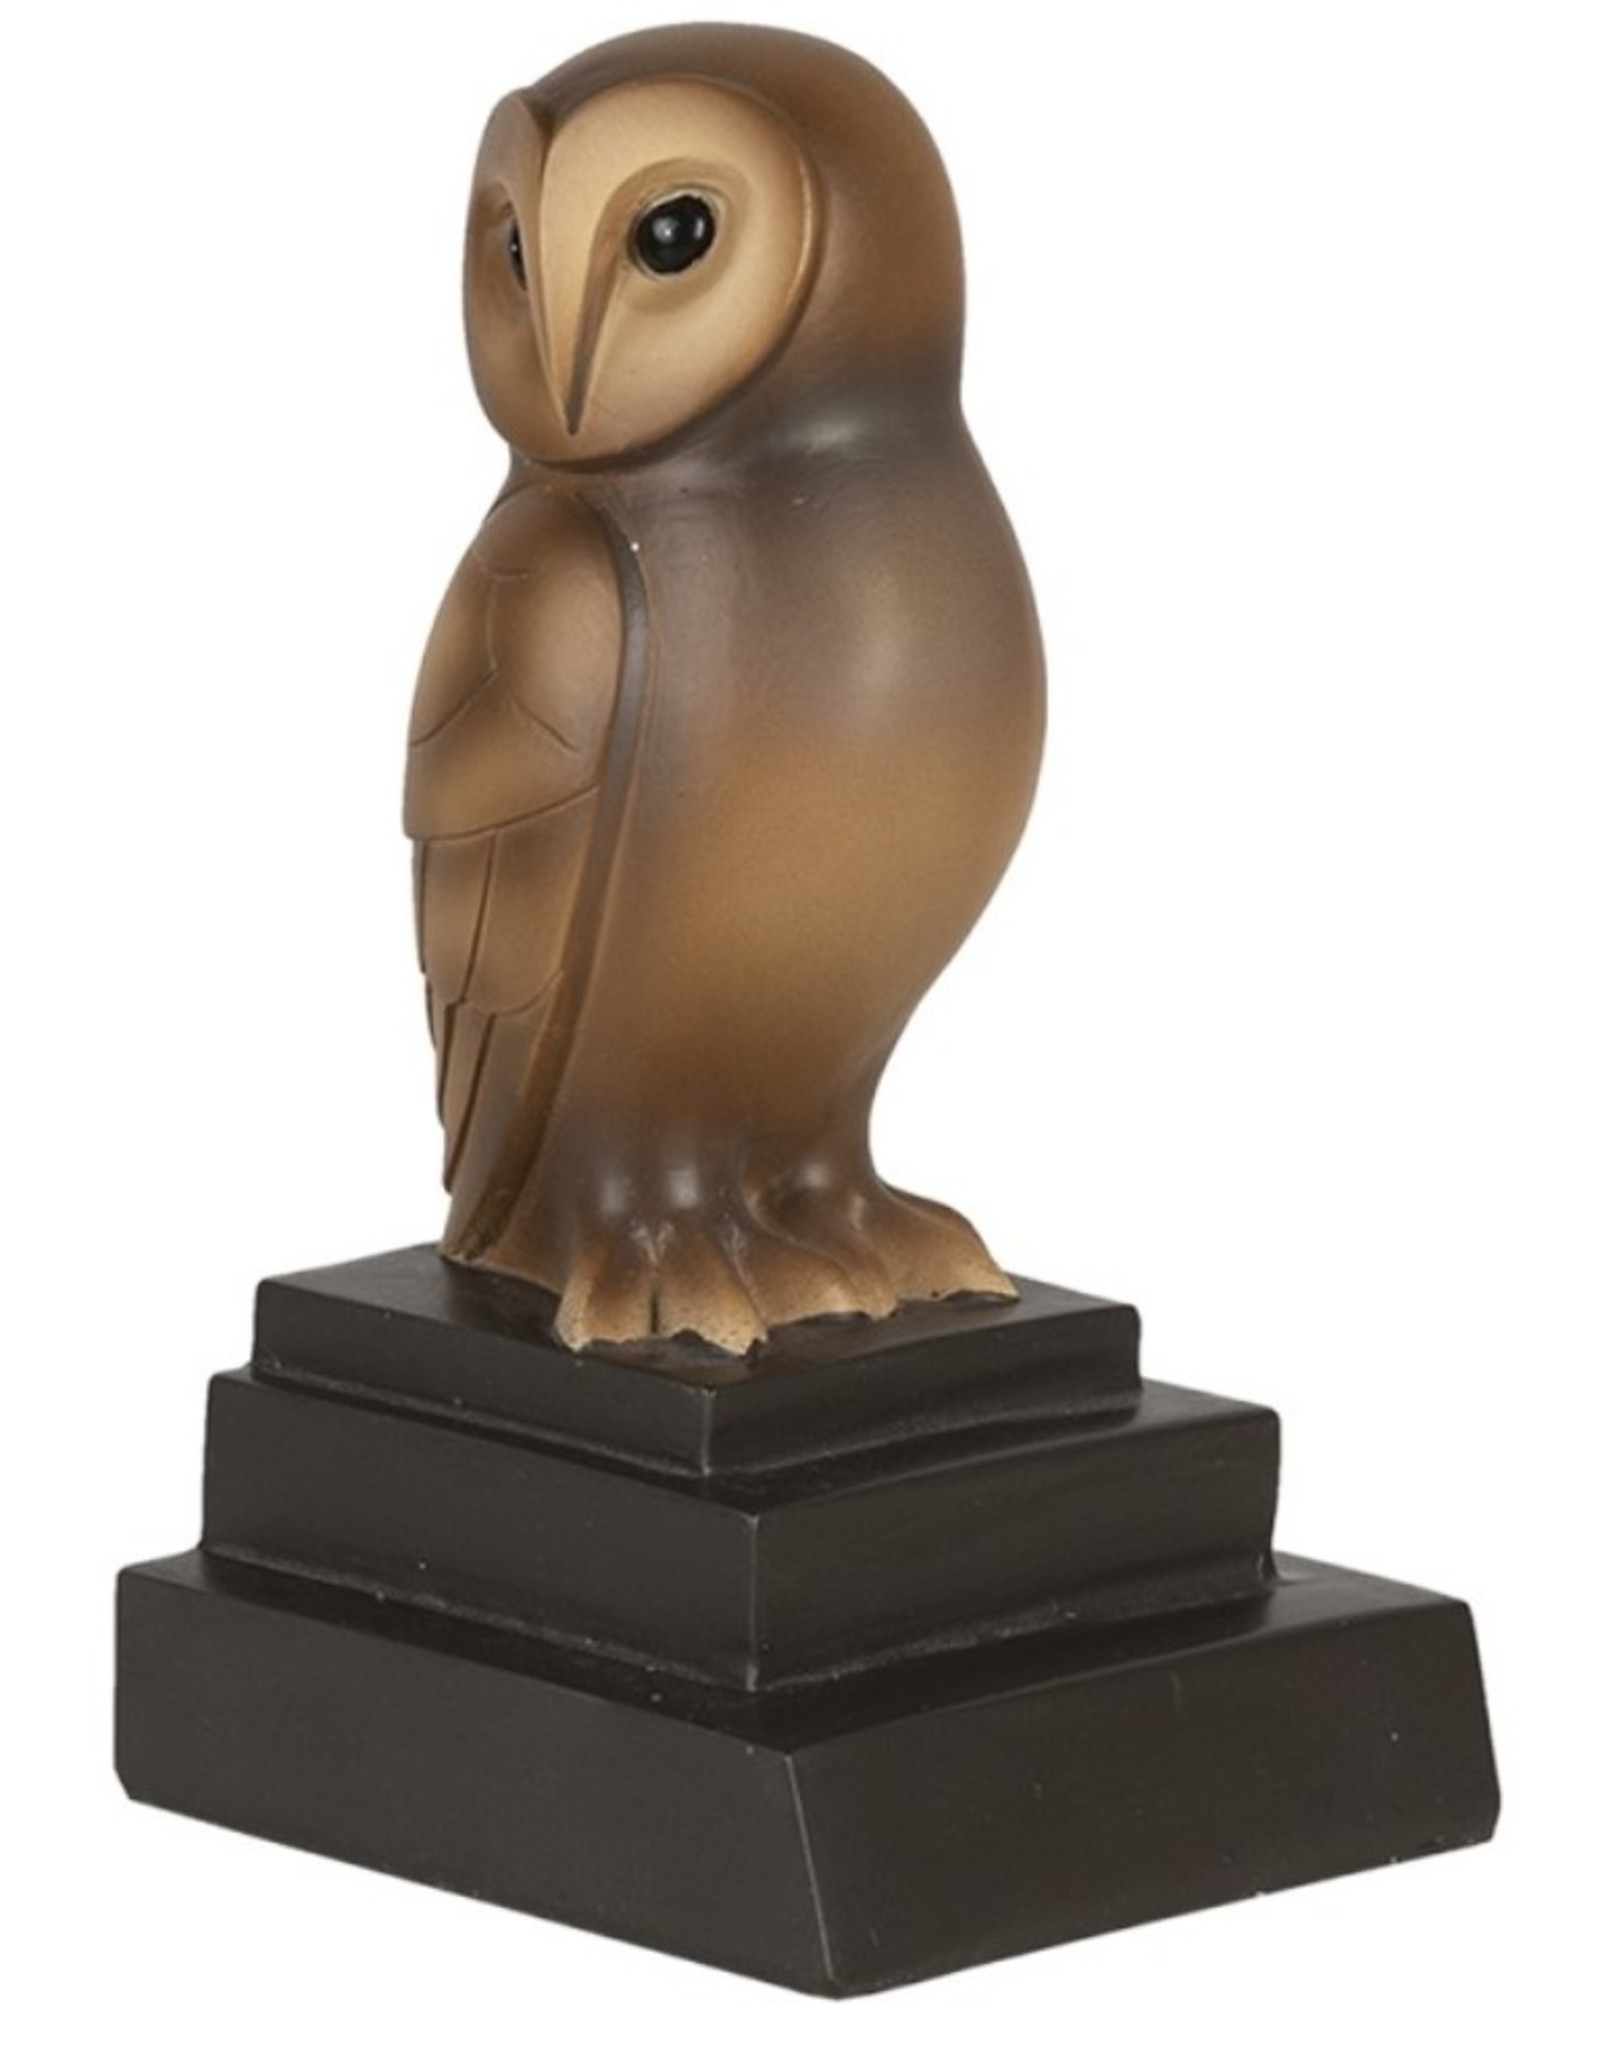 C&E Miscellaneous - Owl Bookends Set of 2, brown